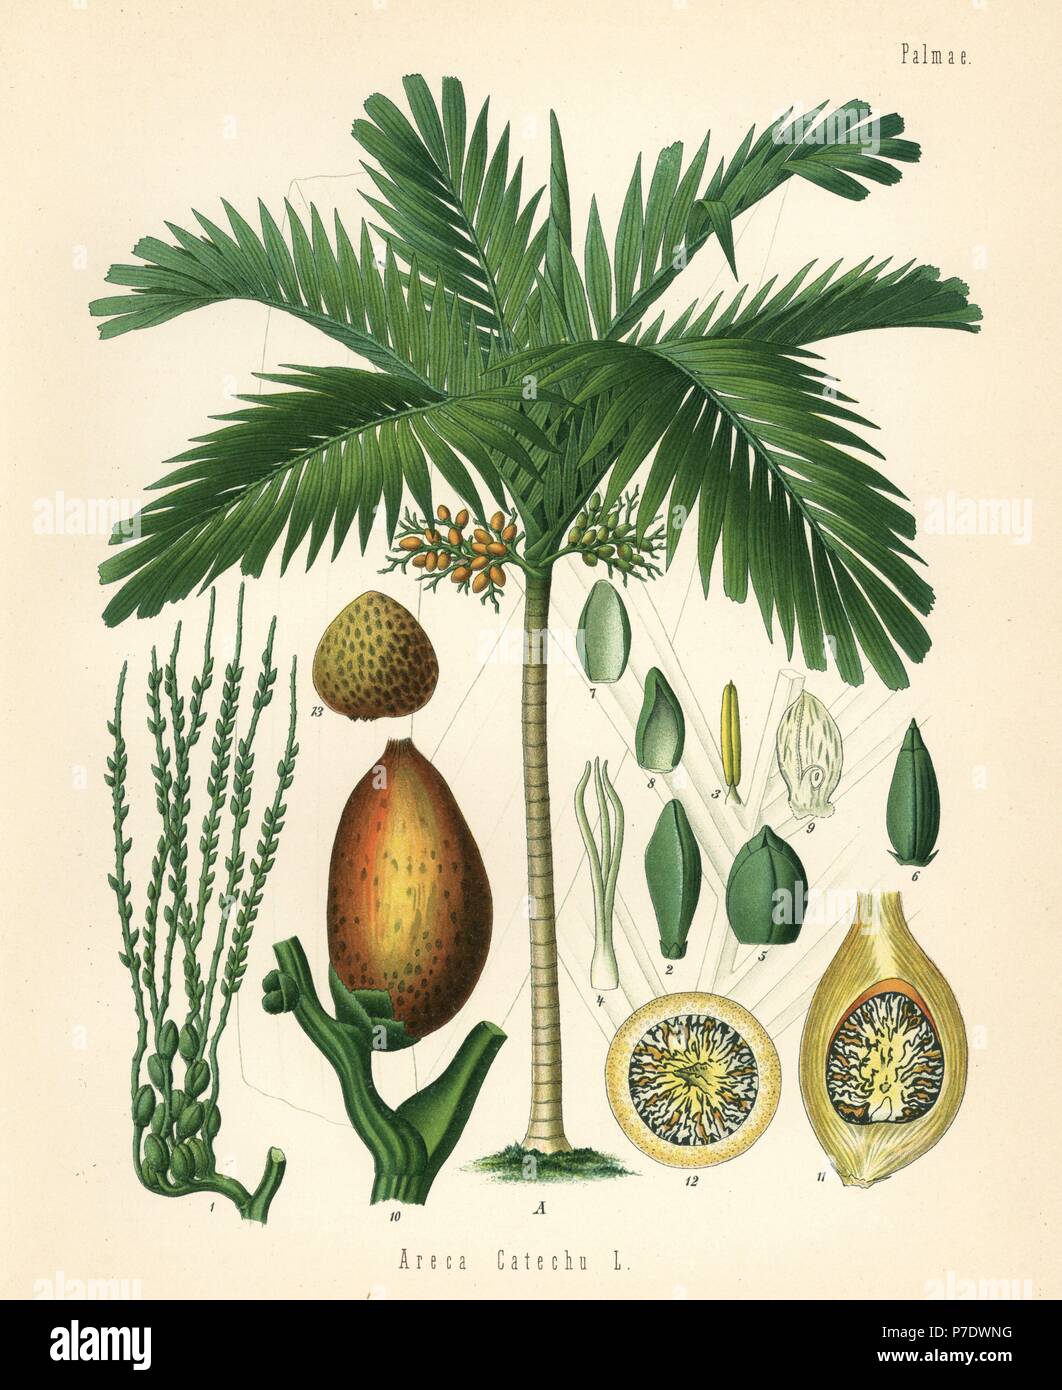 Betelnut palm, Areca catechu. Chromolithograph after a botanical illustration from Hermann Adolph Koehler's Medicinal Plants, edited by Gustav Pabst, Koehler, Germany, 1887. Stock Photo